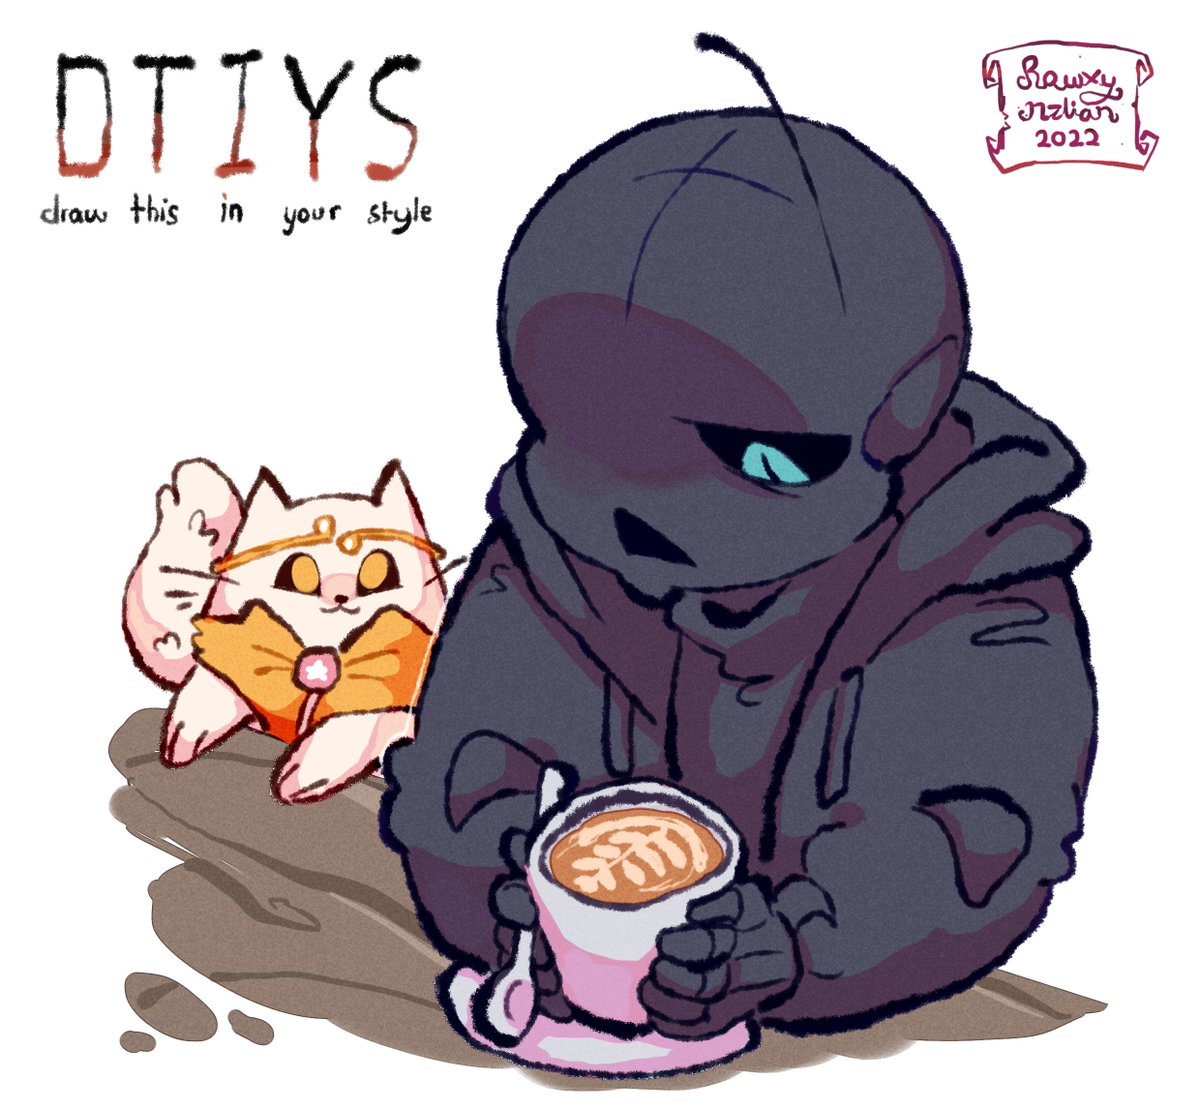 I haven't done a dtiys in a very long time and i think it's time to come back to it ;; 

Rules:
- feel free to change anything except the characters!
- use the tag #xnzliandtiys for me to see ur beautiful pieces!

no time limit!
not a contest!

Dream and Noot belong to Jokublog